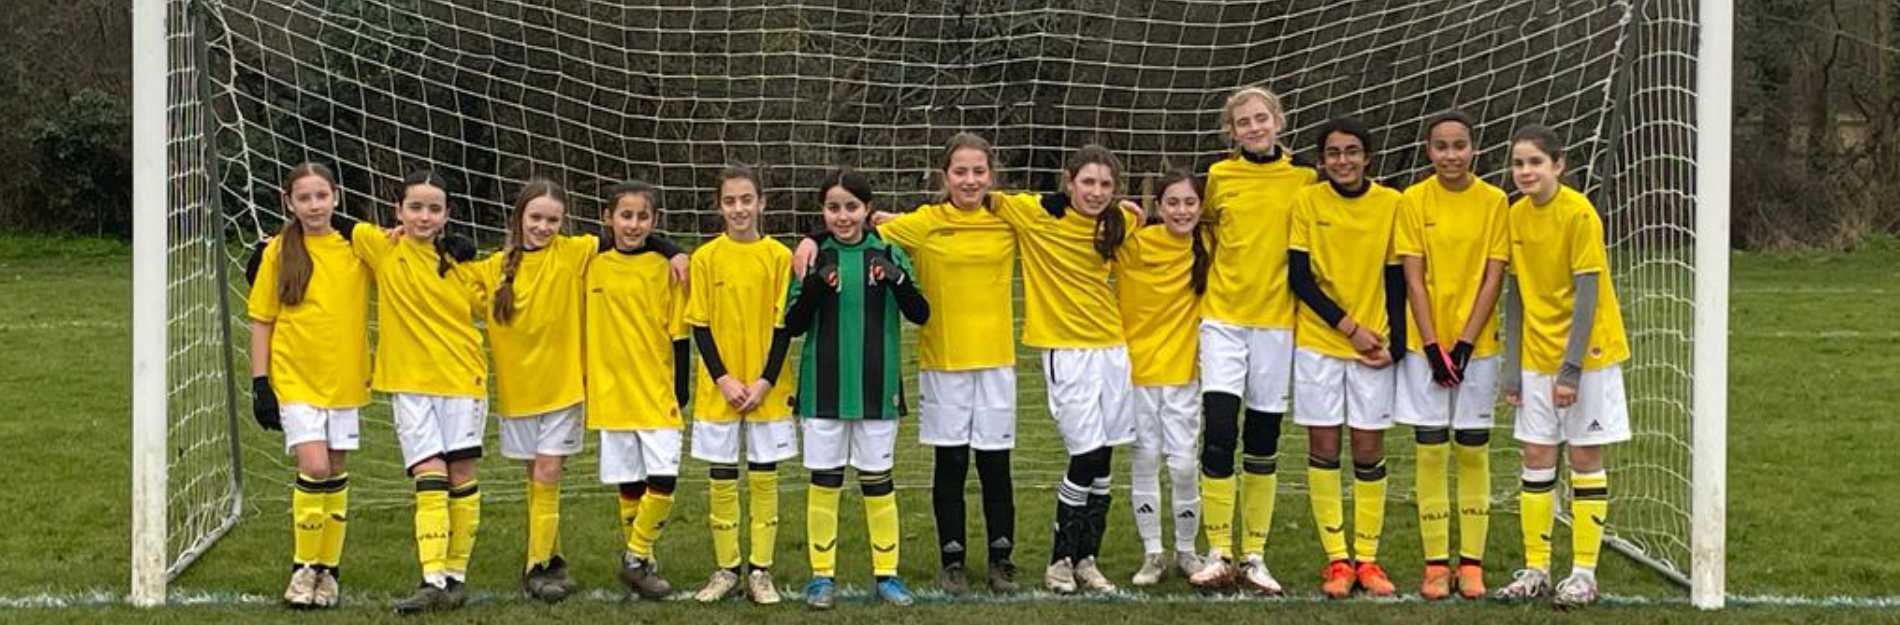 COMMUNITY | HIVE FOUNDATION DONATE PLAYING KIT FOR BARNET GIRLS DISTRICT TEAM